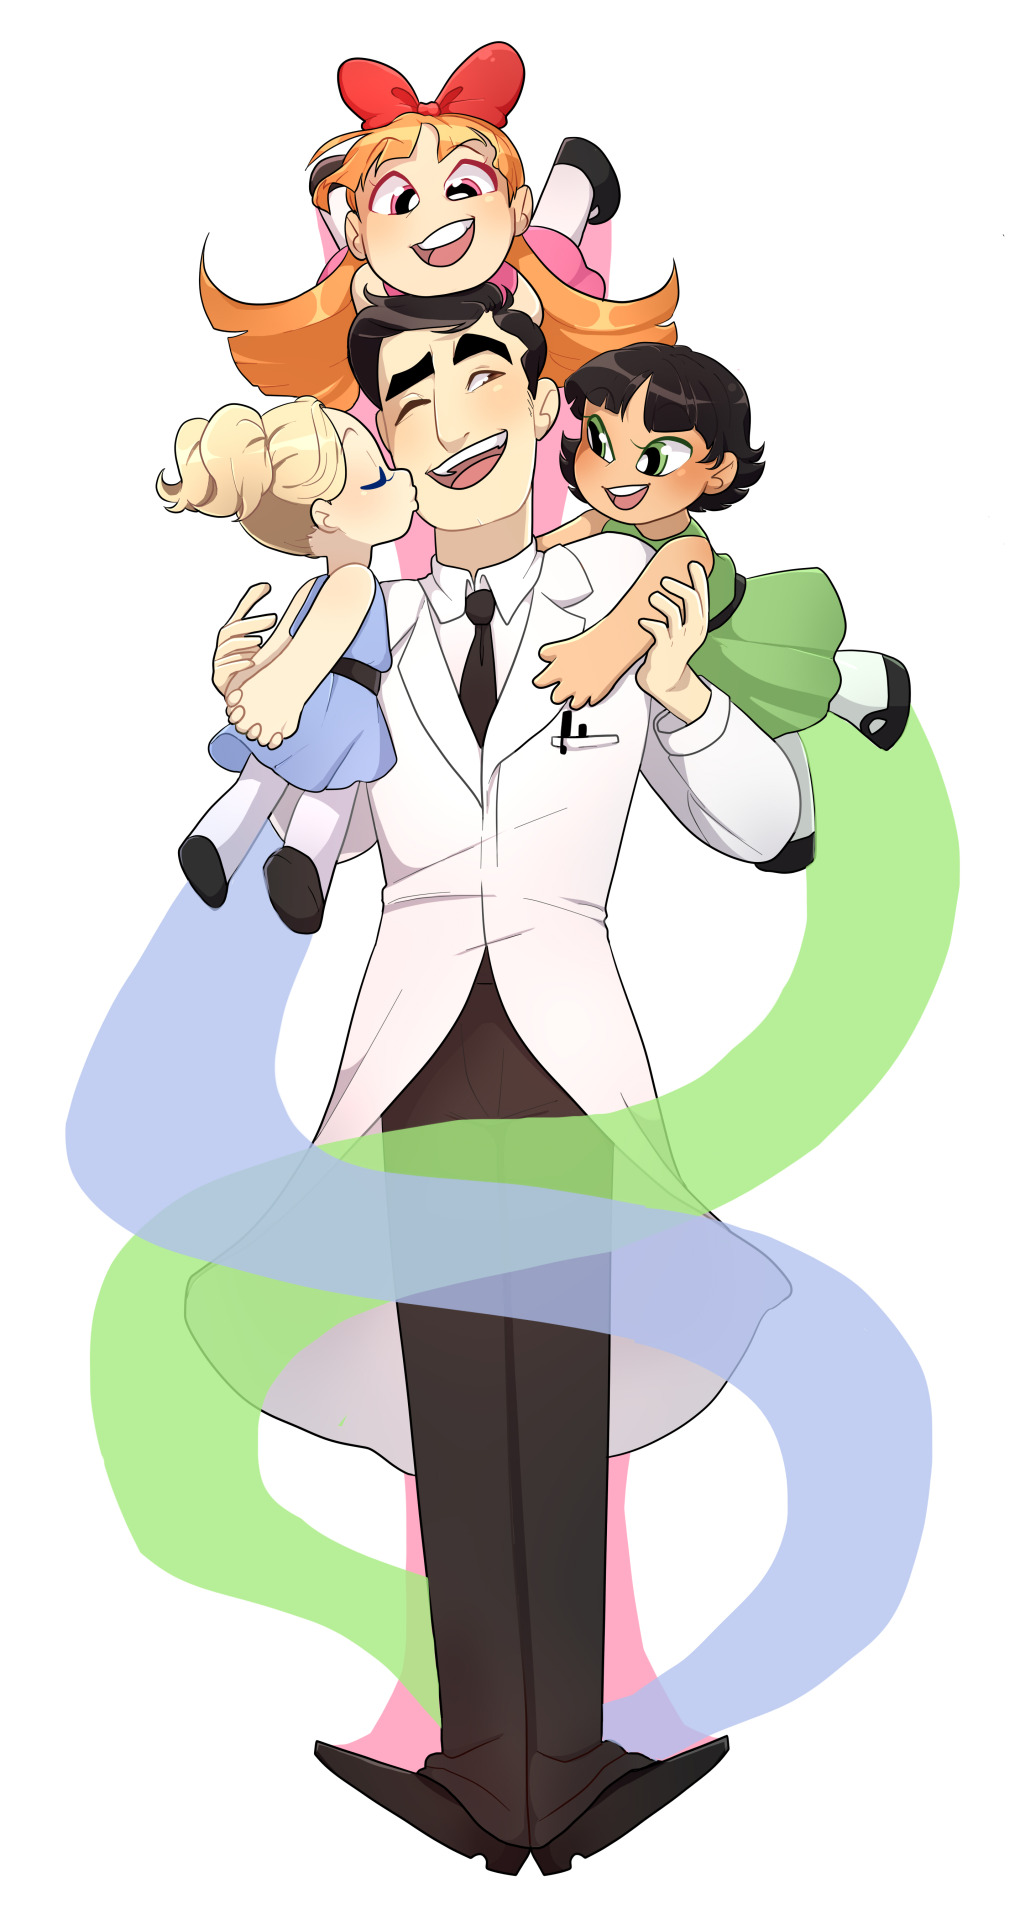 1boy 3girls bangs black_hair blonde_hair blossom_(ppg) blue_eyes blunt_bangs blush bow brown_eyes bubbles_(ppg) buttercup_(ppg) cheek_kiss eyebrows father_and_daughter flipped_hair girl_sandwich green_eyes hair_bow highres kiss labcoat long_hair looking_at_another multiple_girls one_eye_closed open_mouth pink_eyes powerpuff_girls professor_utonium redhead ringed_eyes sandwiched short_twintails siblings sisters tan tan_skin thick_eyebrows twintails